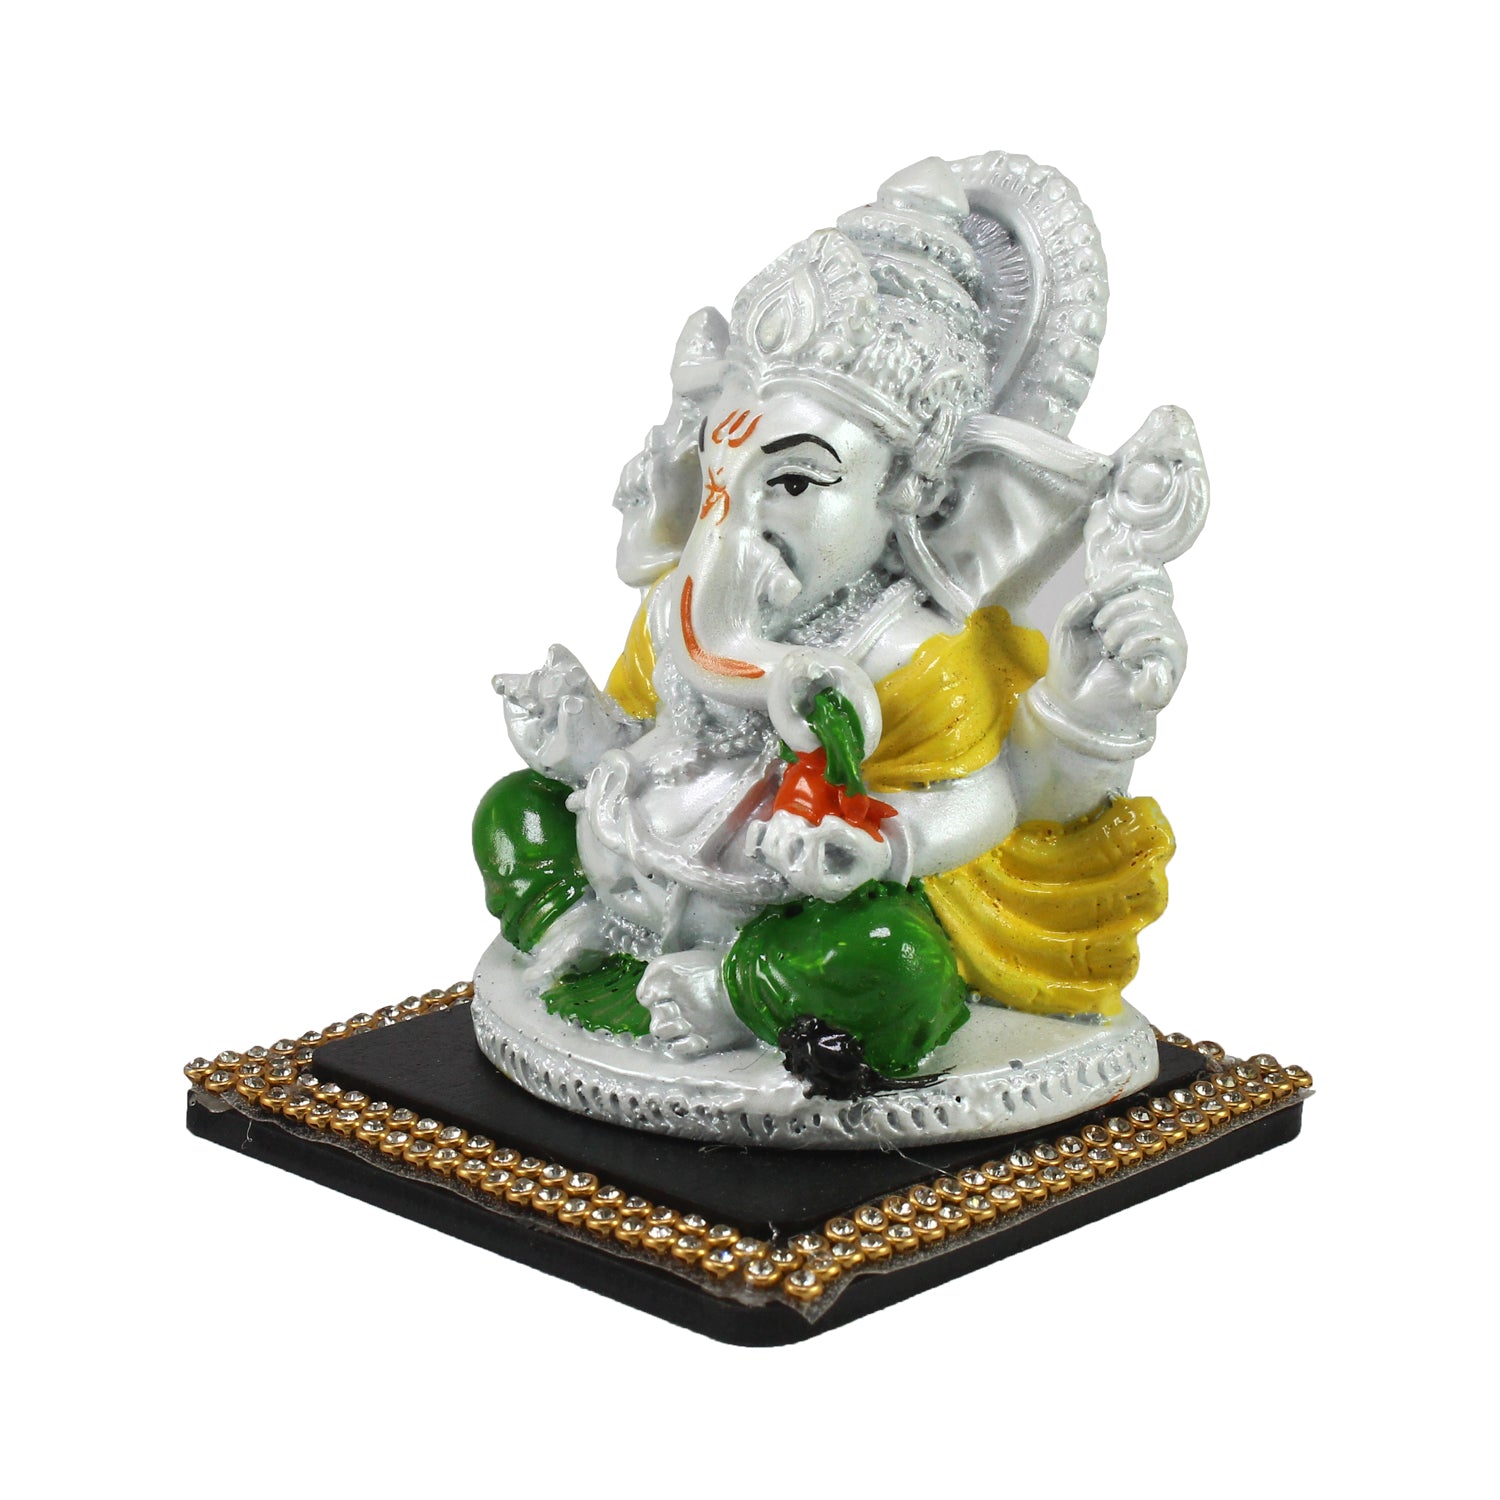 Decorative Lord Ganesha Showpiece for Car Dashboard, Home Temple and Office Desks 4